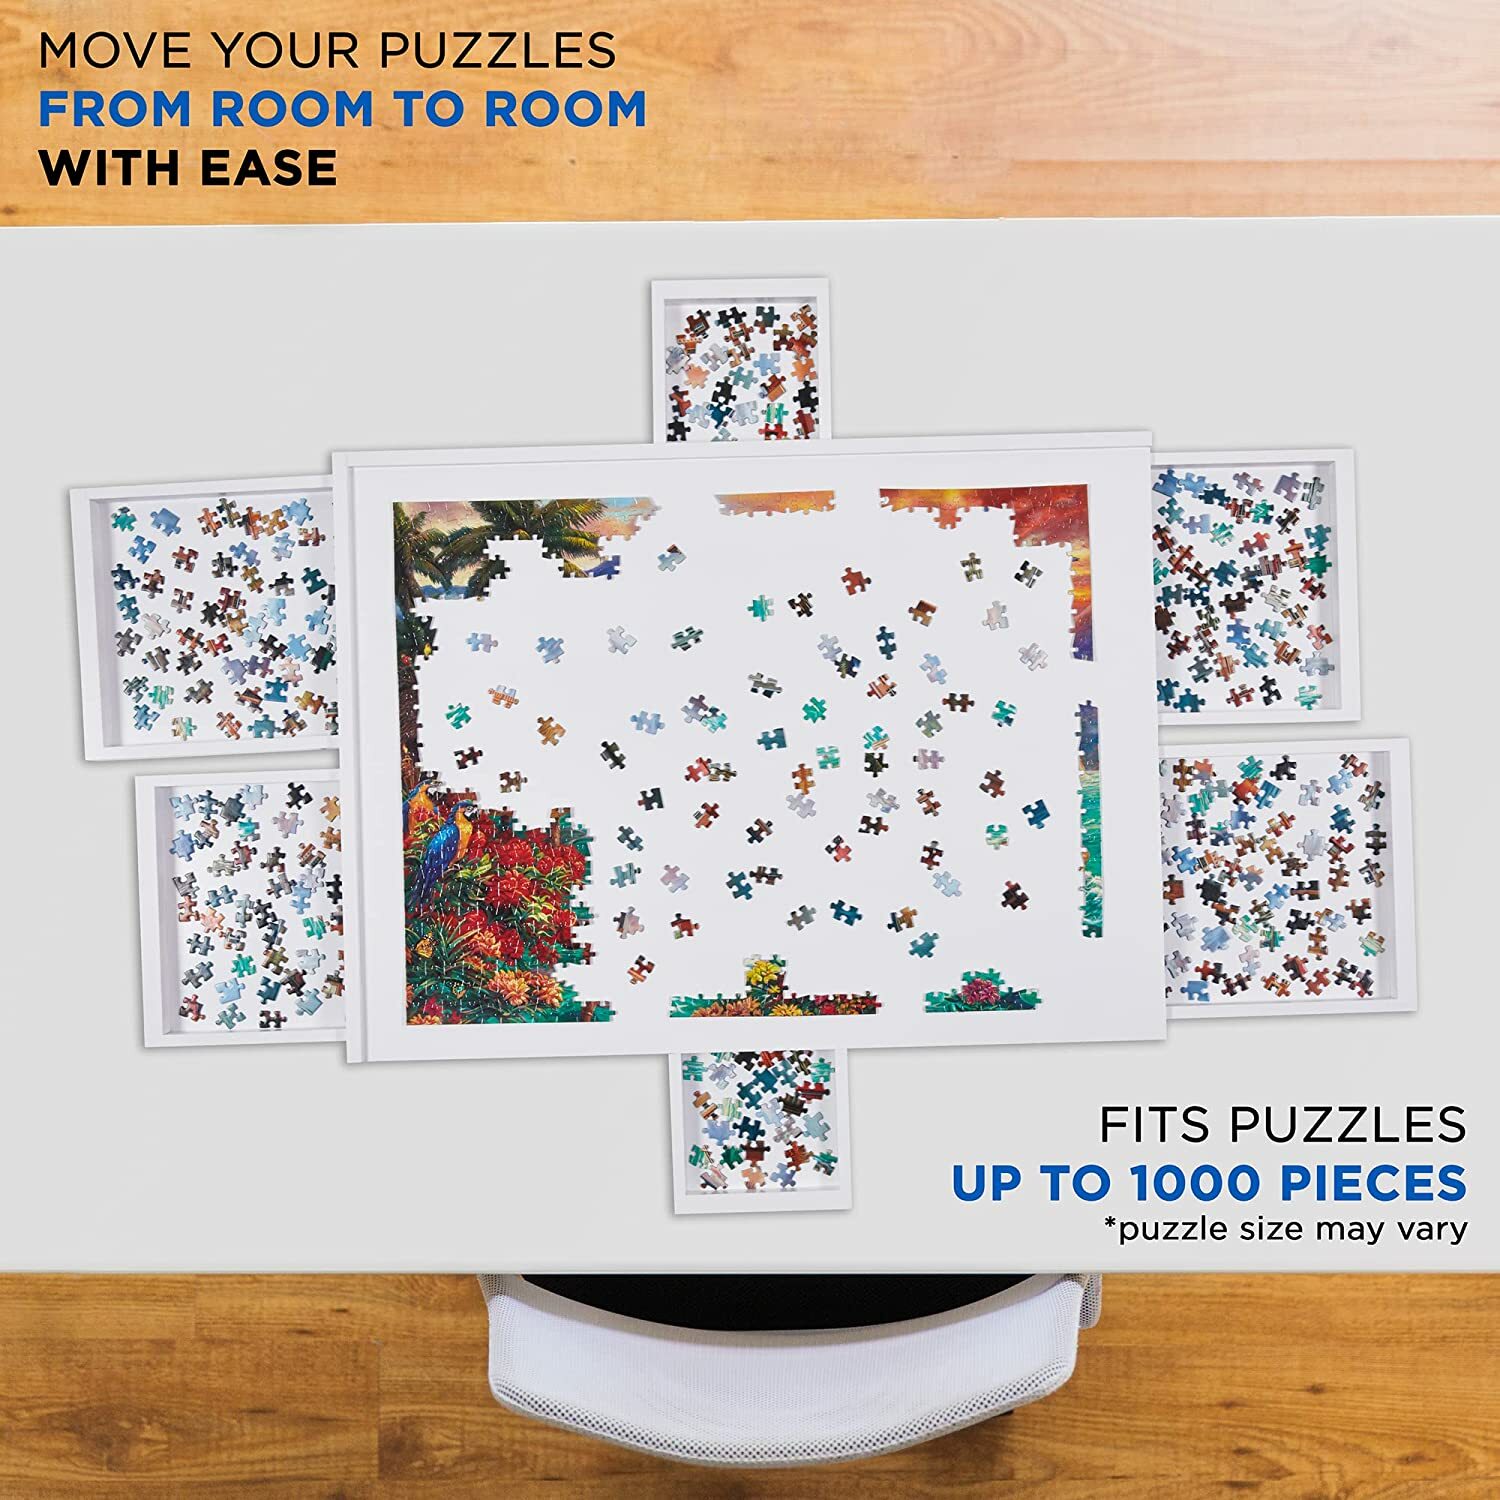 Jumbl 1000 Piece Puzzle Board, 23” x 31” Wooden Jigsaw Puzzle Table Board  w/Felt Surface & Storage Drawers